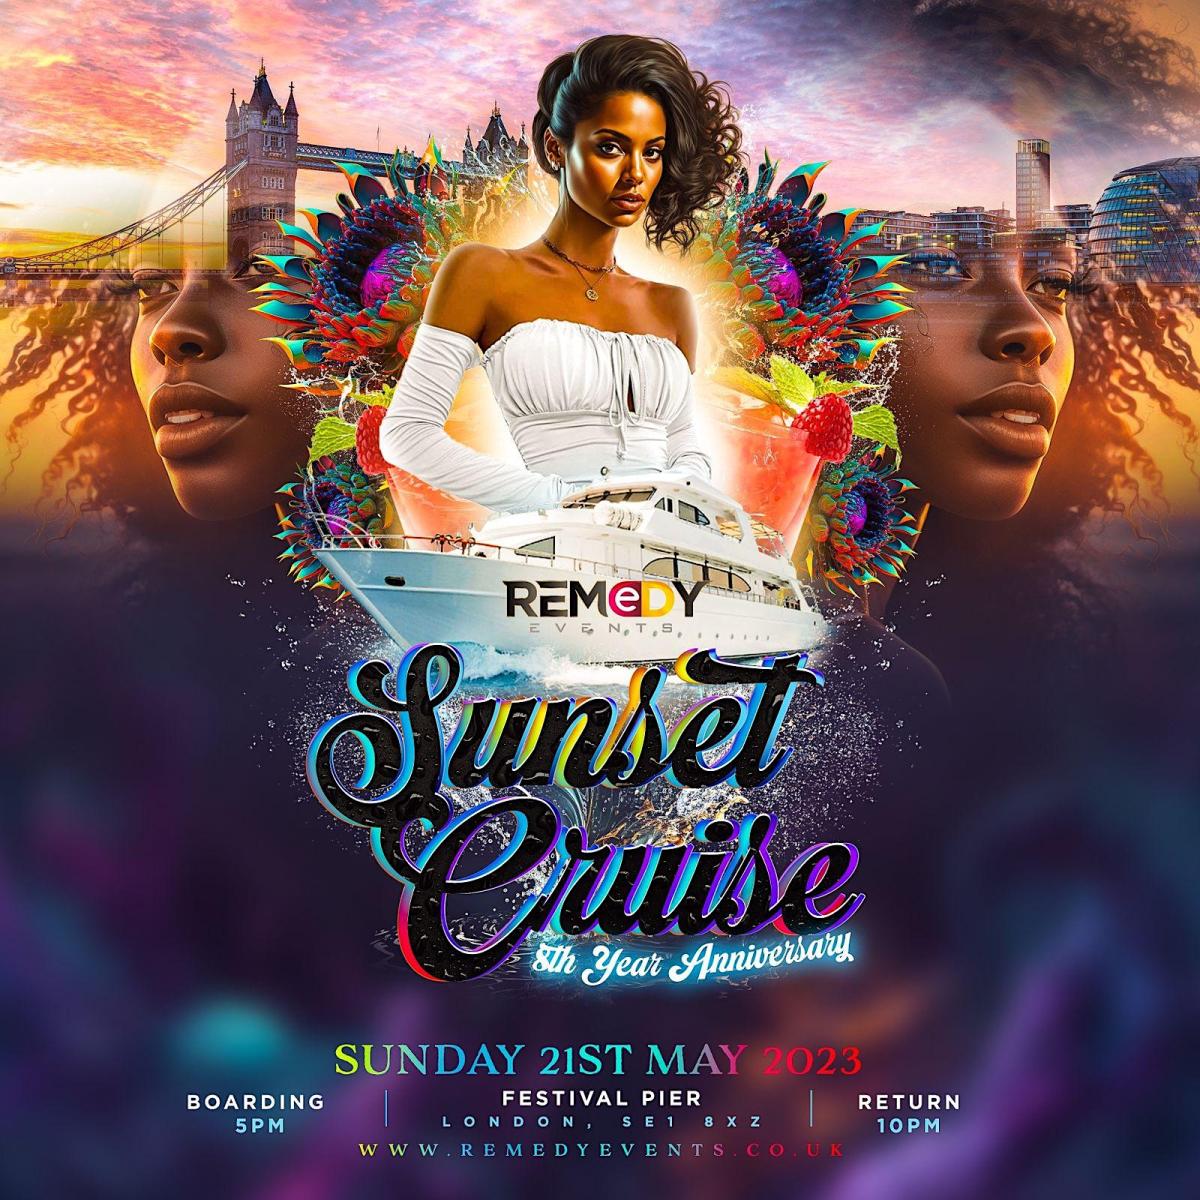 Sunset Cruise  flyer or graphic.